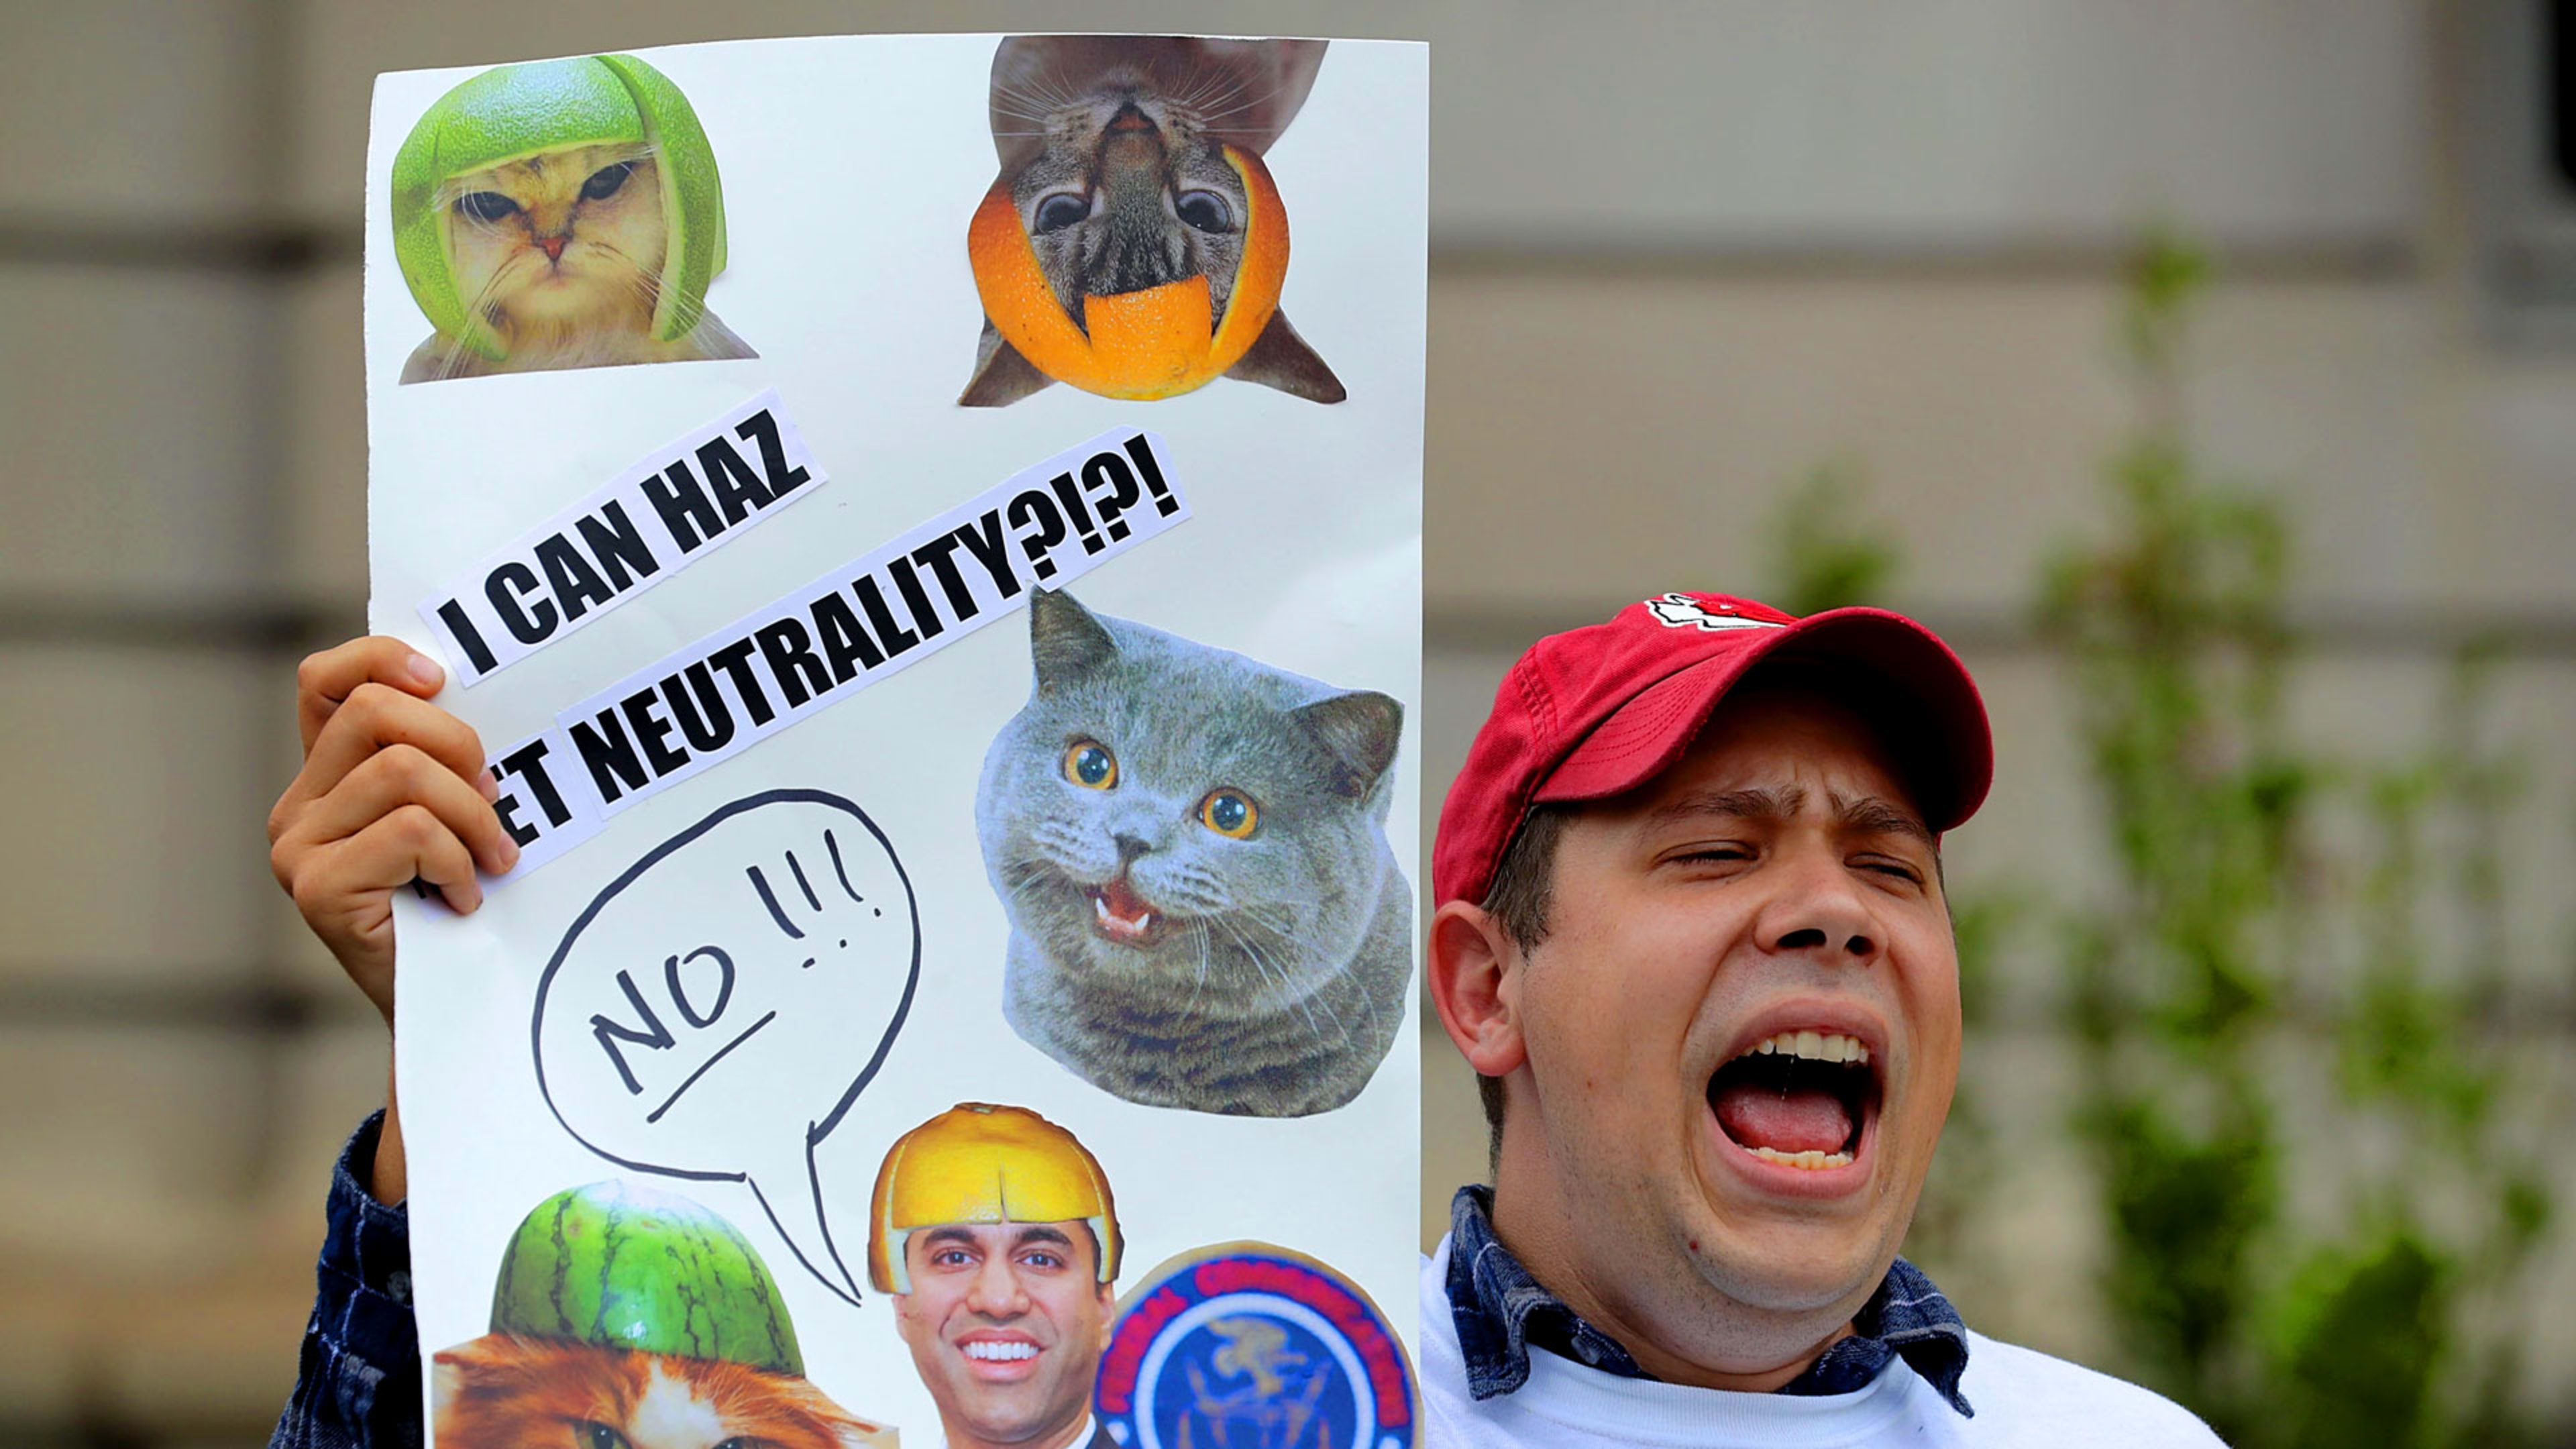 Pro-net neutrality protests are coming to a Verizon store near you